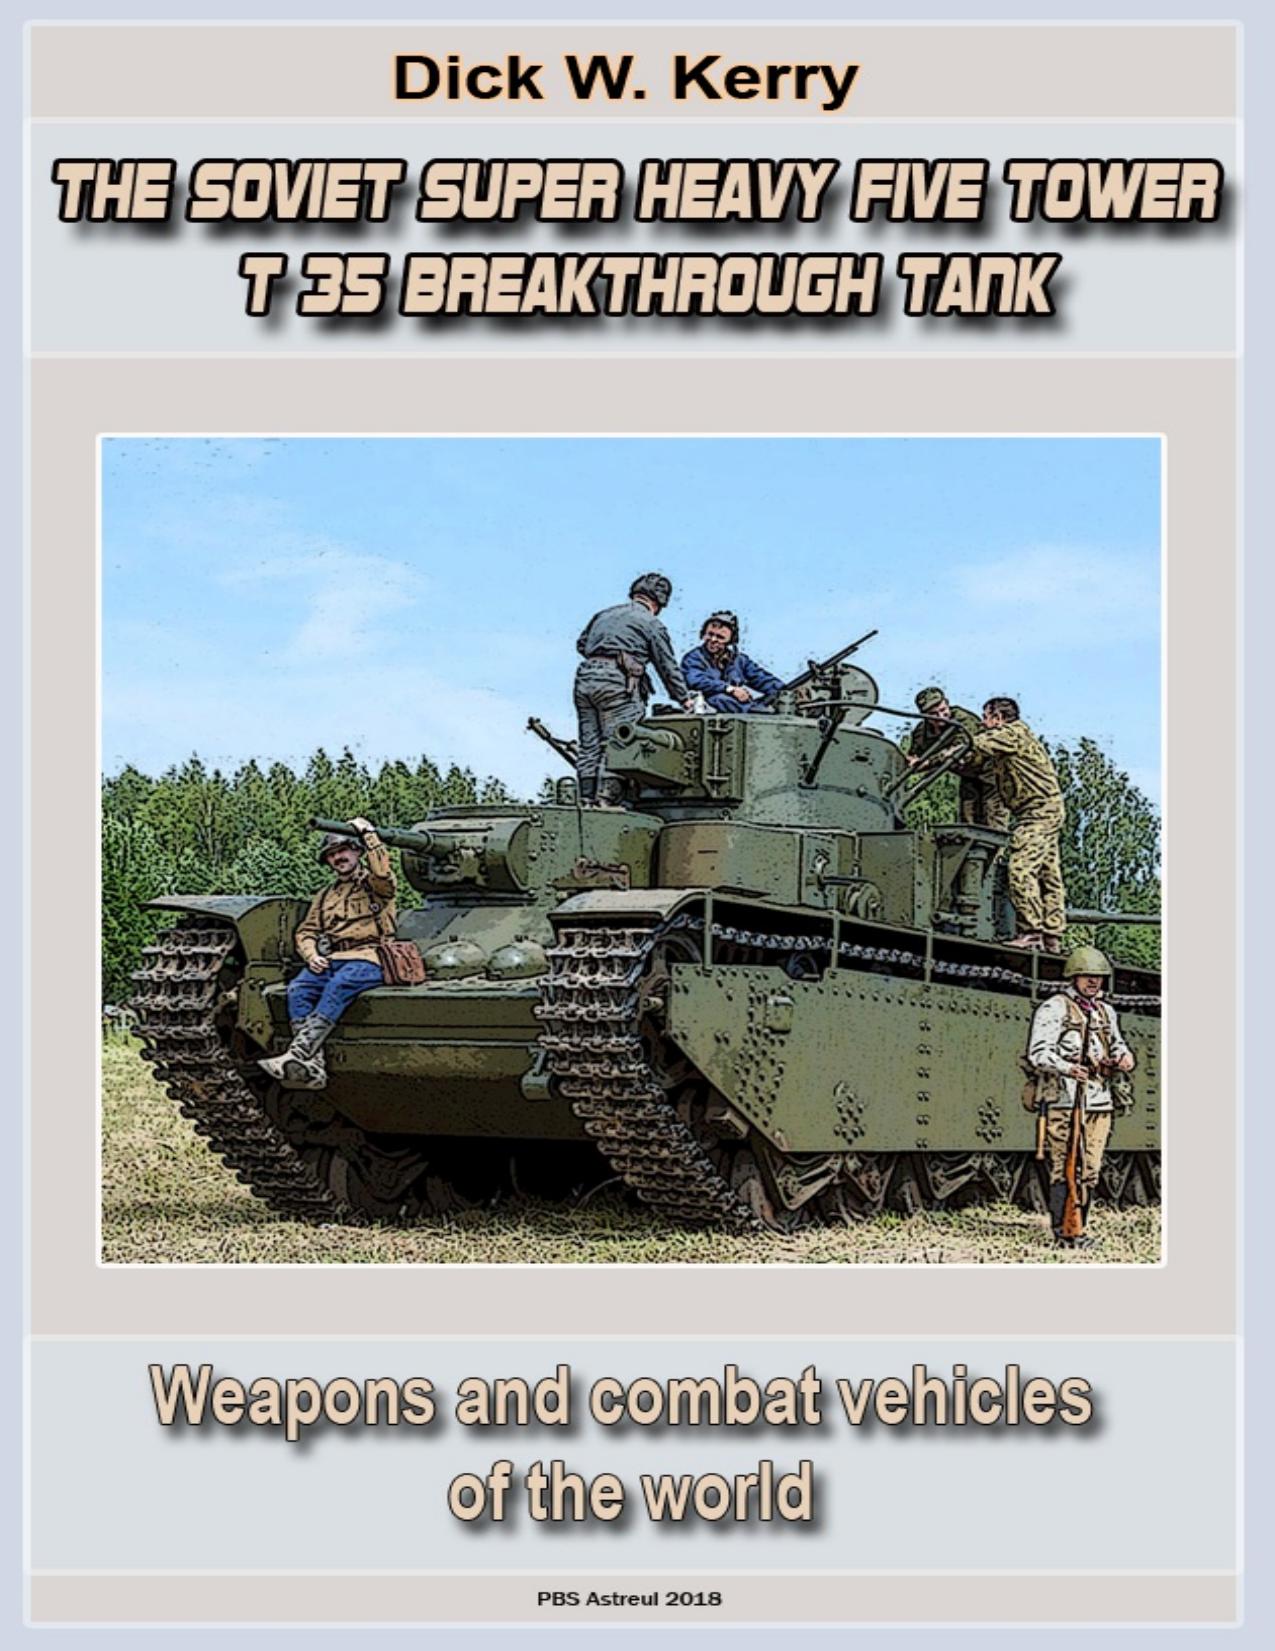 The Soviet Super-Heavy Five-tower T-35 Breakthrough Tank: Weapons and combat vehicles of the world by Kerry Dick W